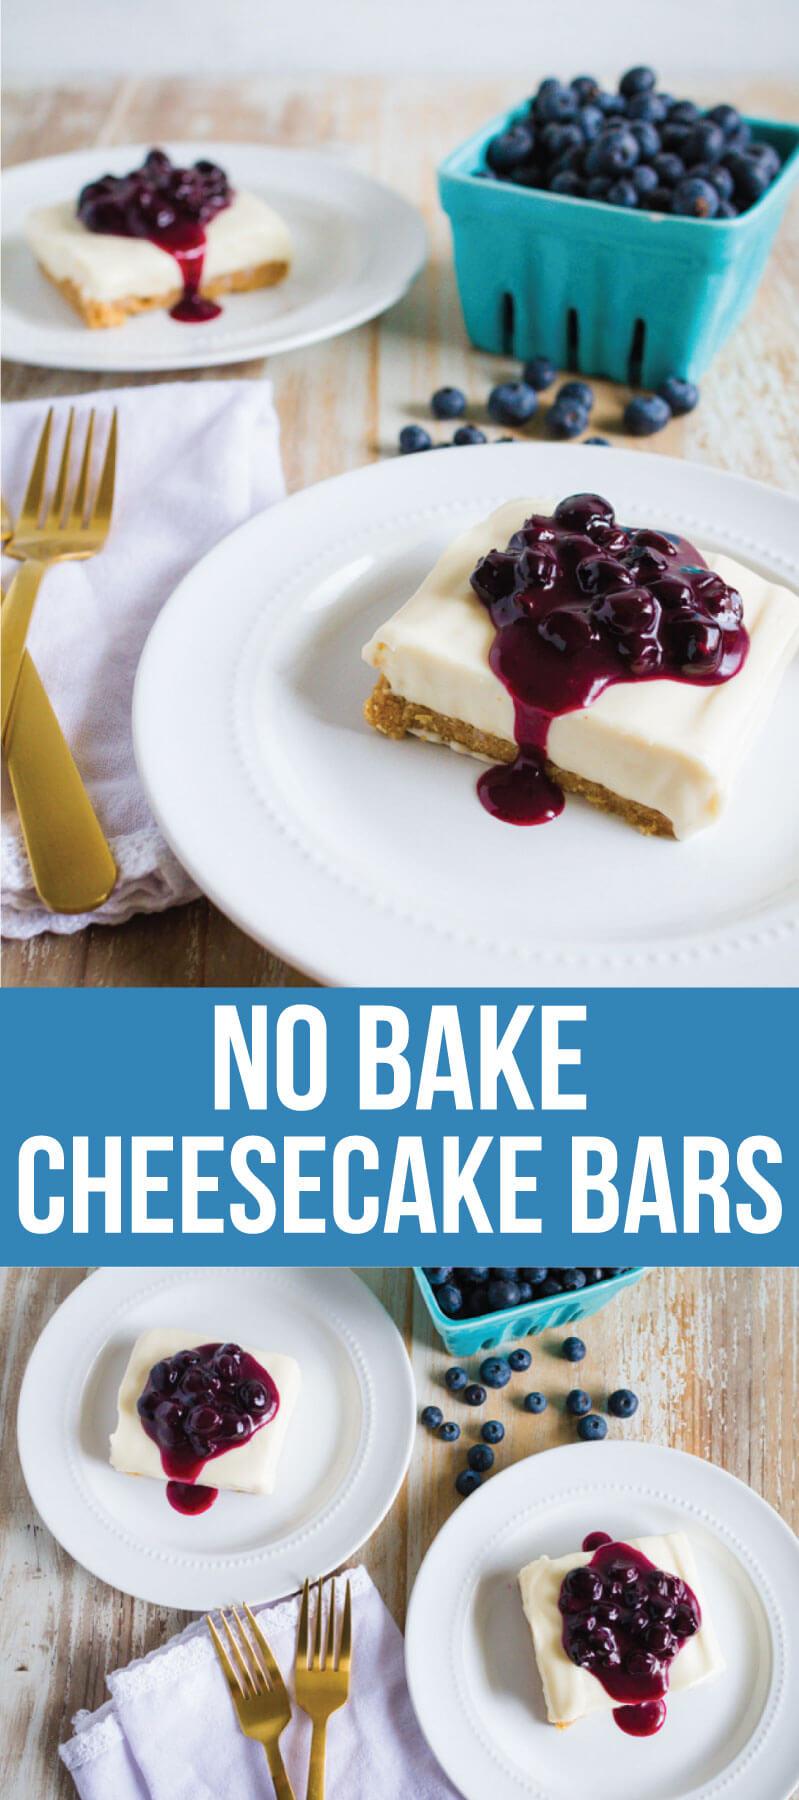 No Bake Cheesecake Bars with Fresh Blueberry Sauce - a delicious, must try, easy dessert. thirtyhandmadedays.com